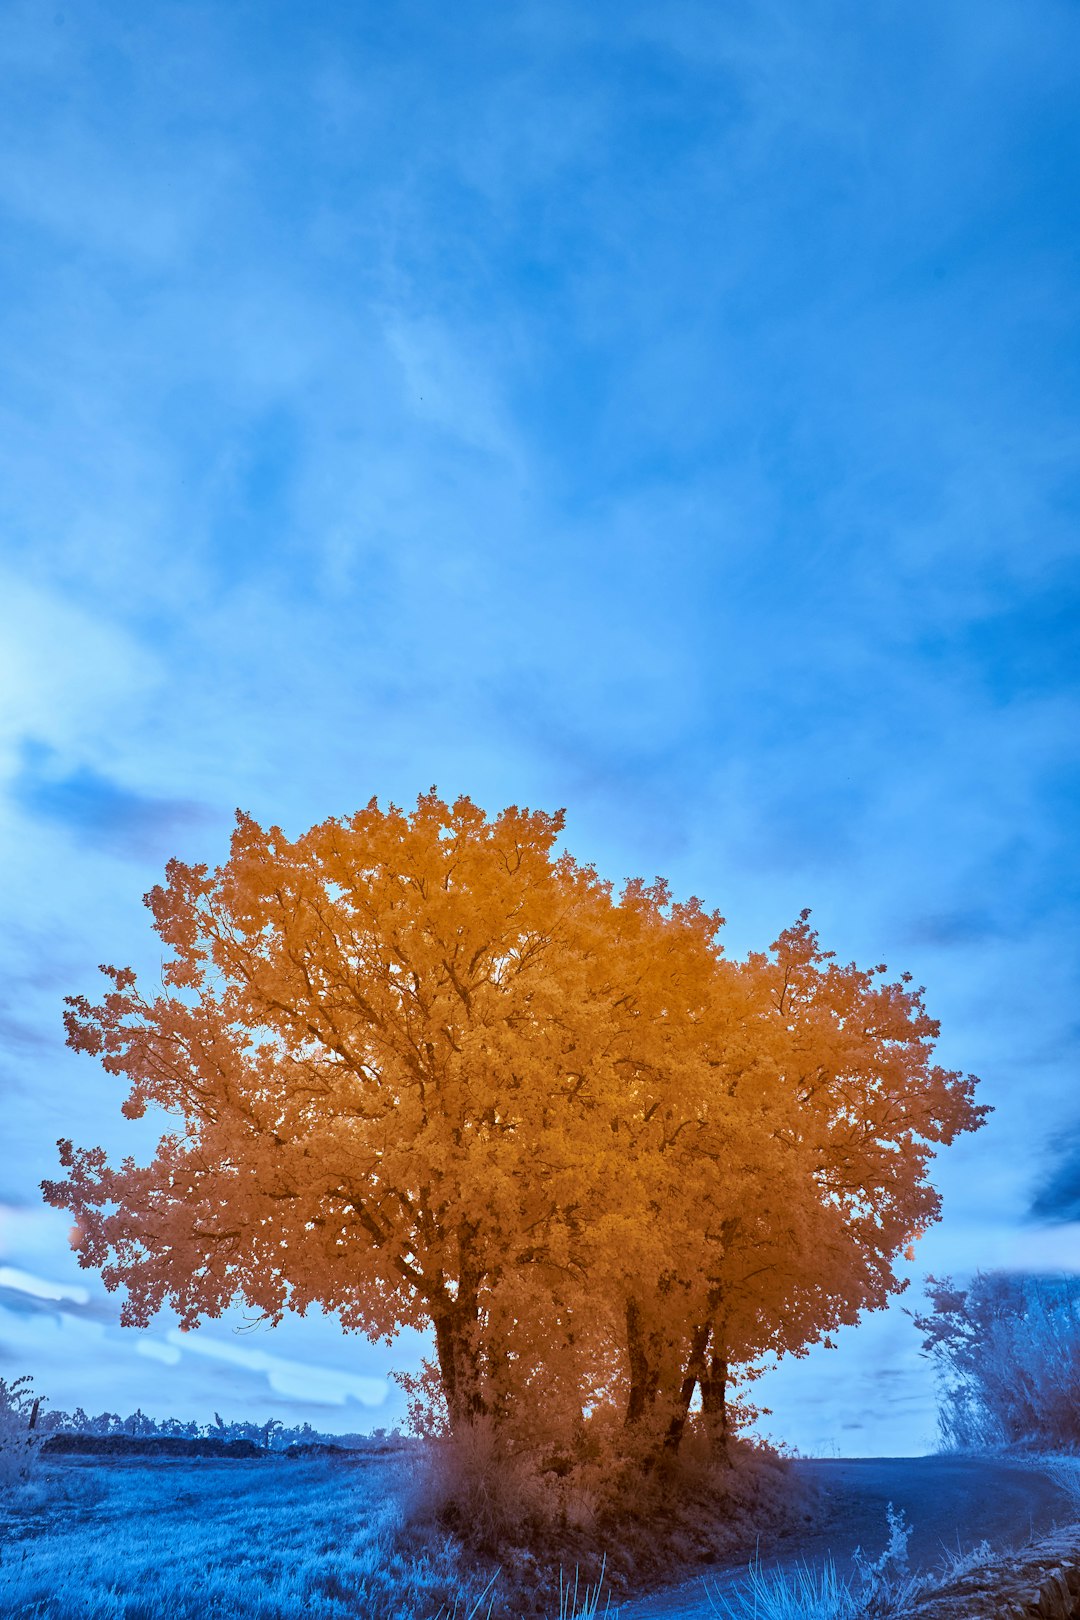 yellow leaf tree under blue sky during daytime